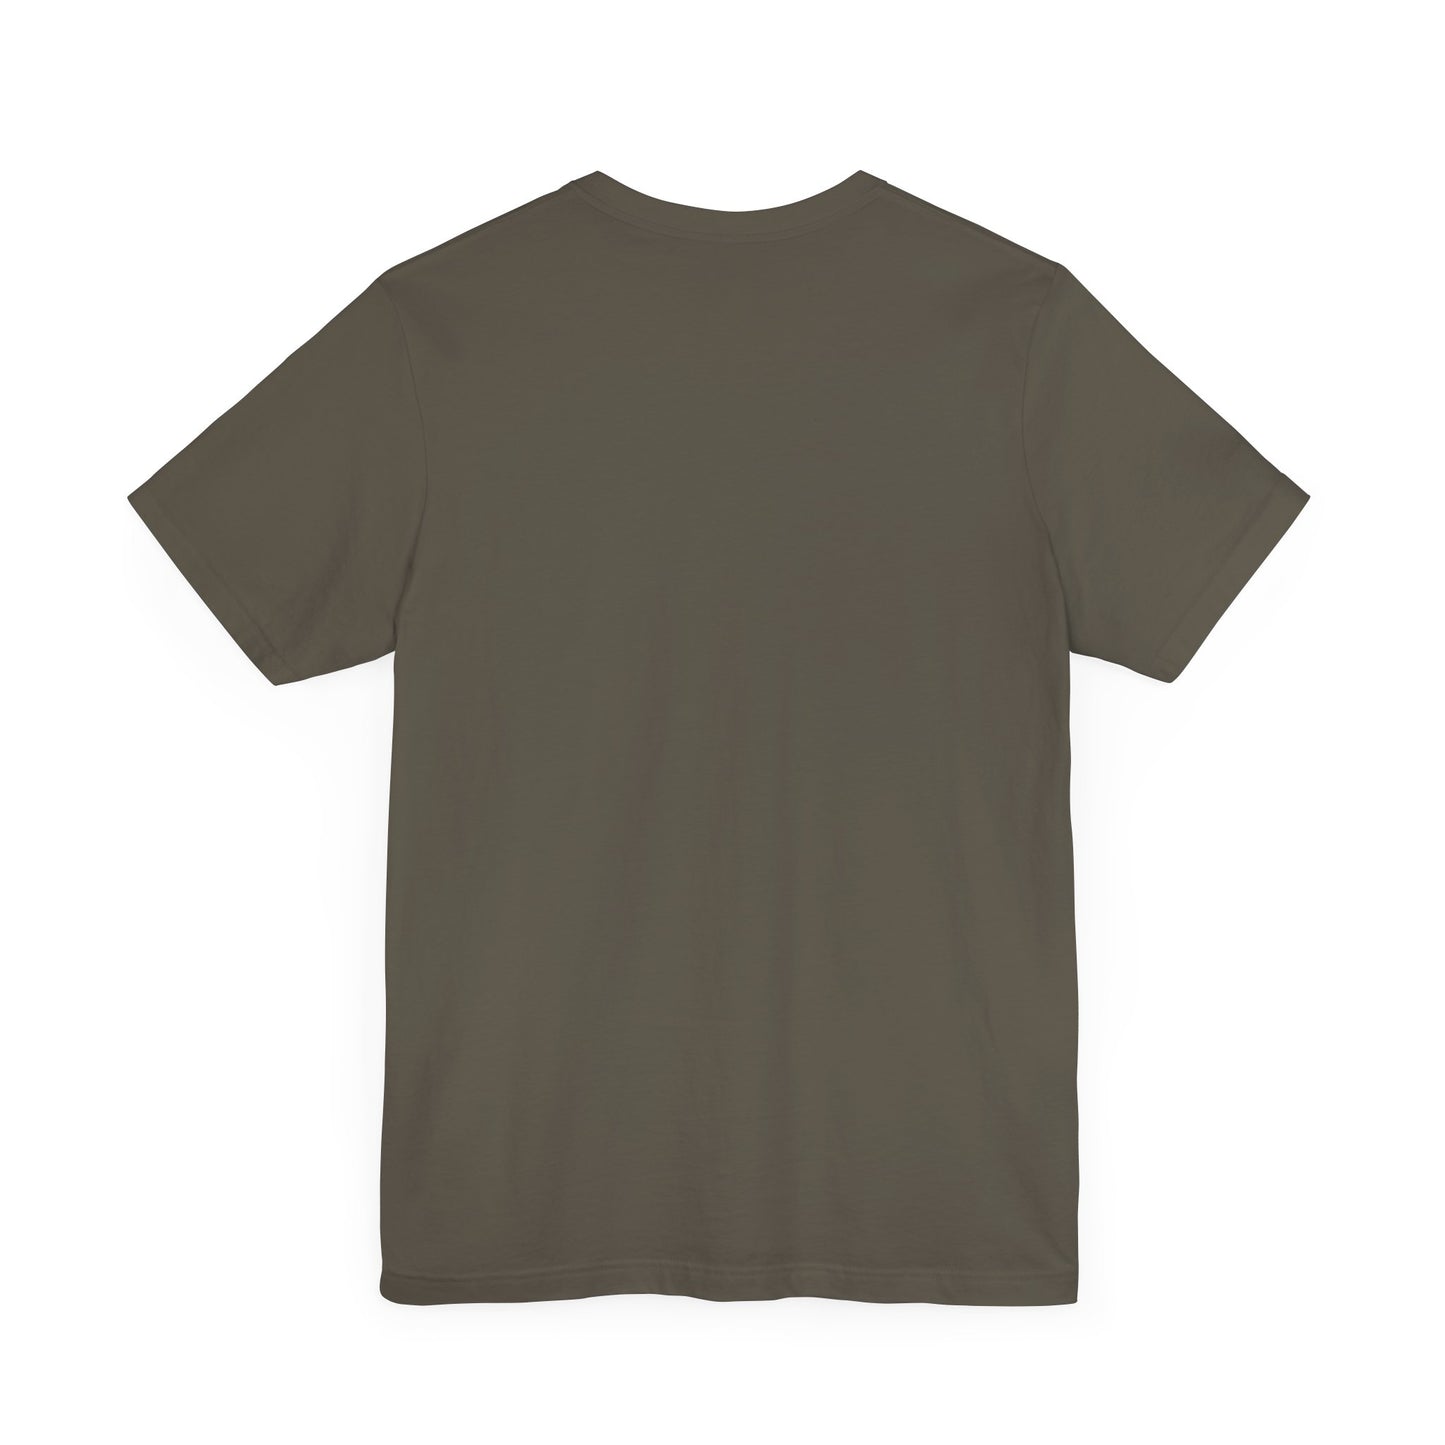 Solid Army. Unisex Jersey Short Sleeve Tee